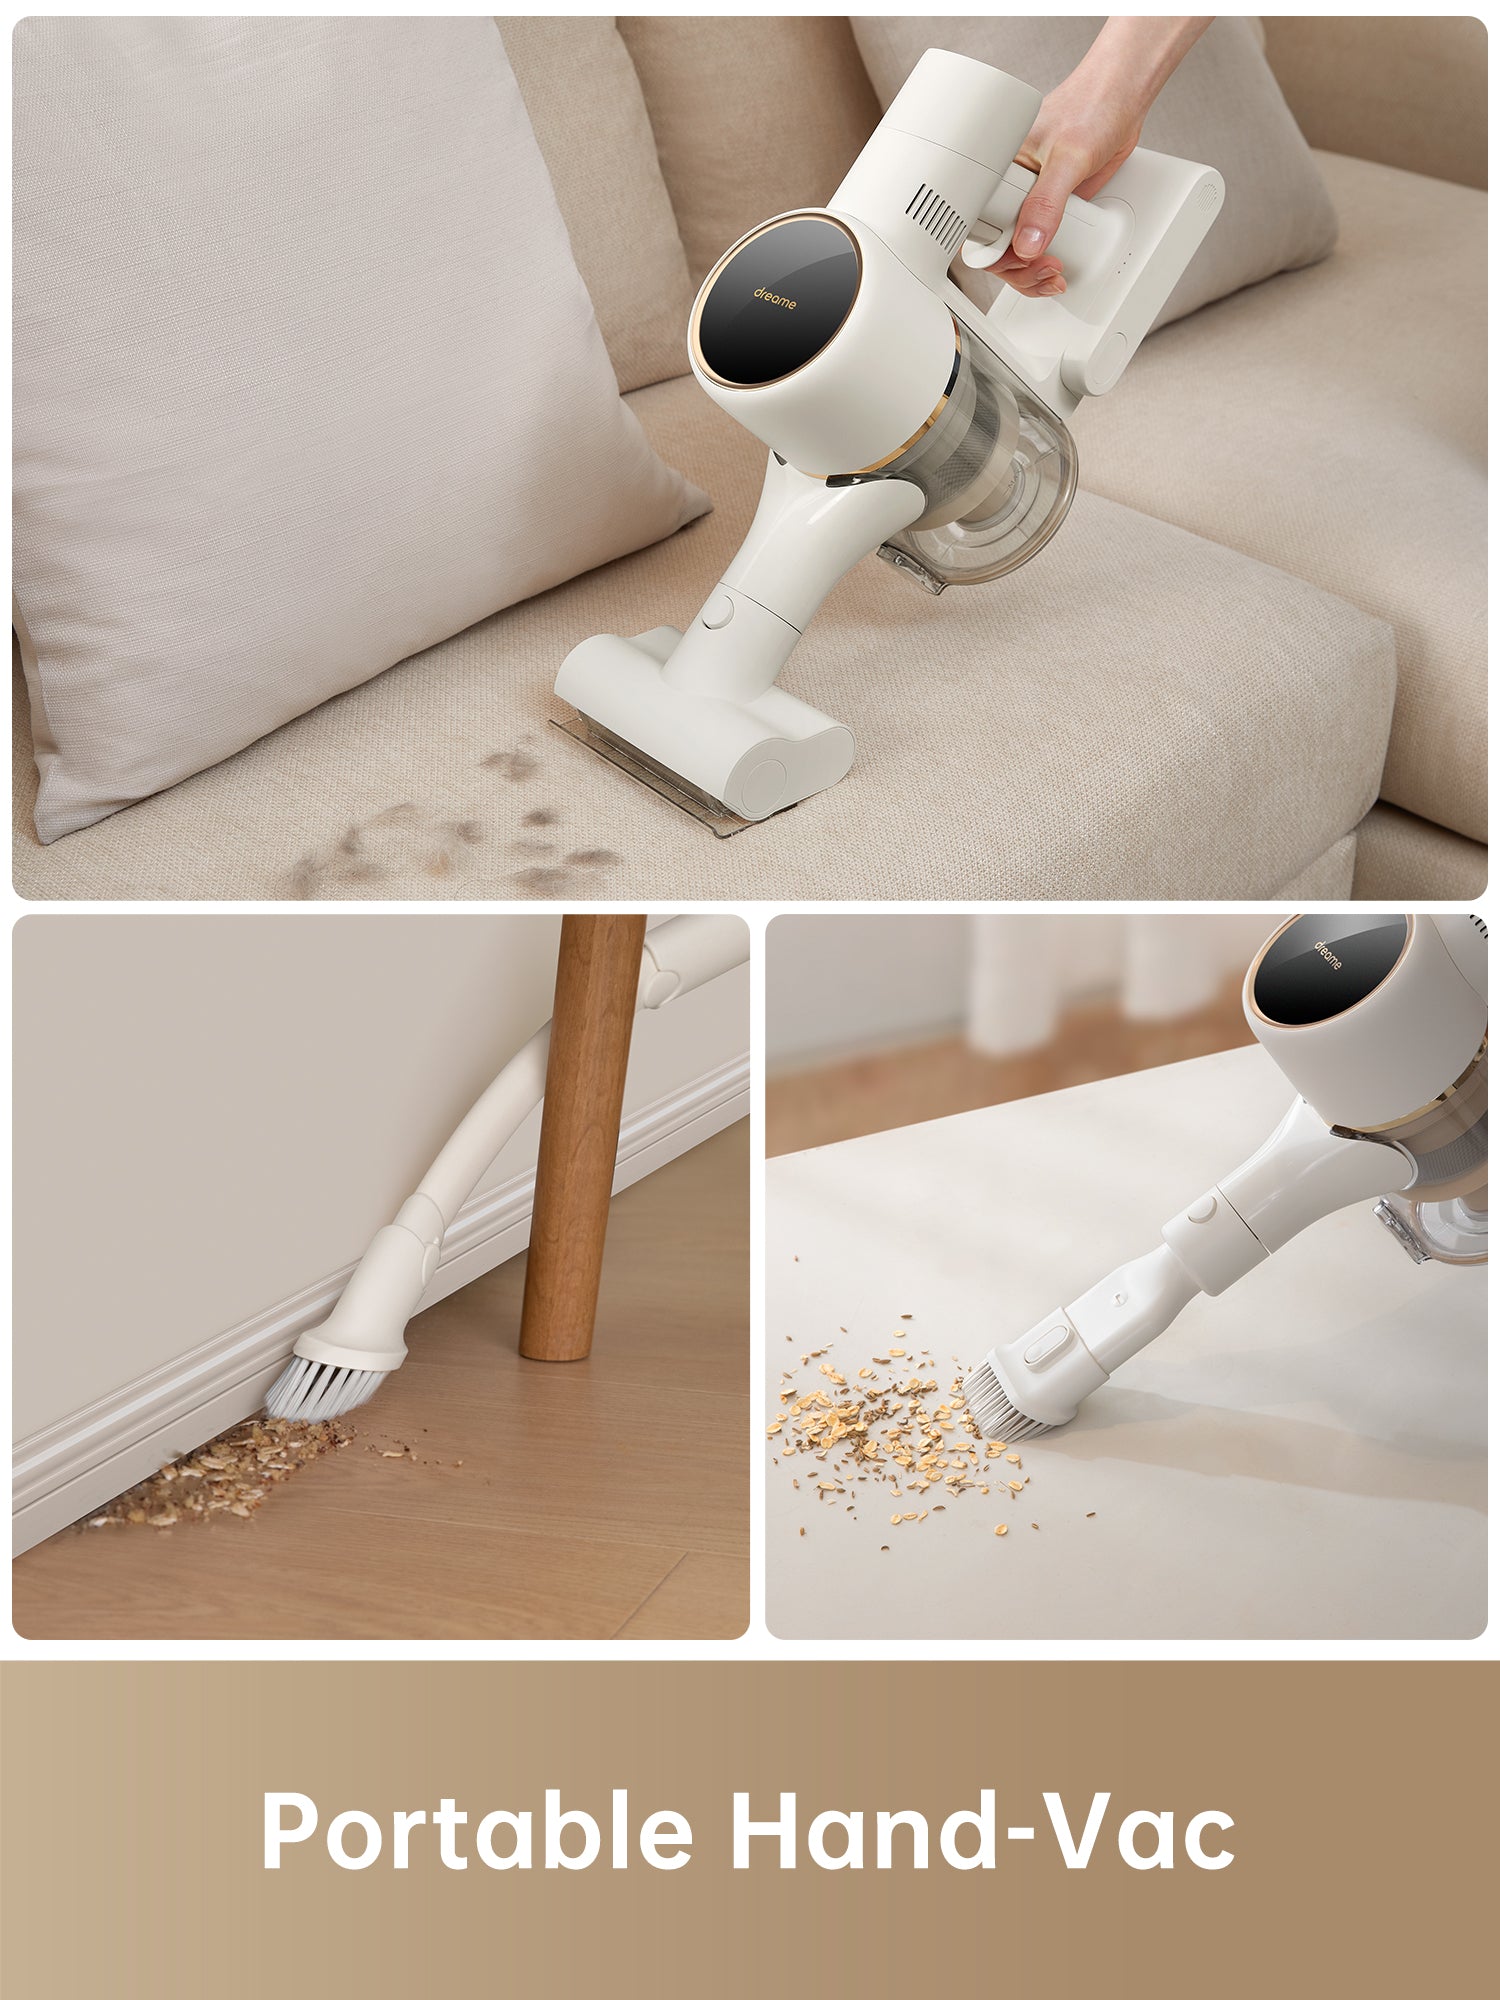 (PREORDER 10 MAY) Dreame R10 Cordless Stick Vacuum Cleaner